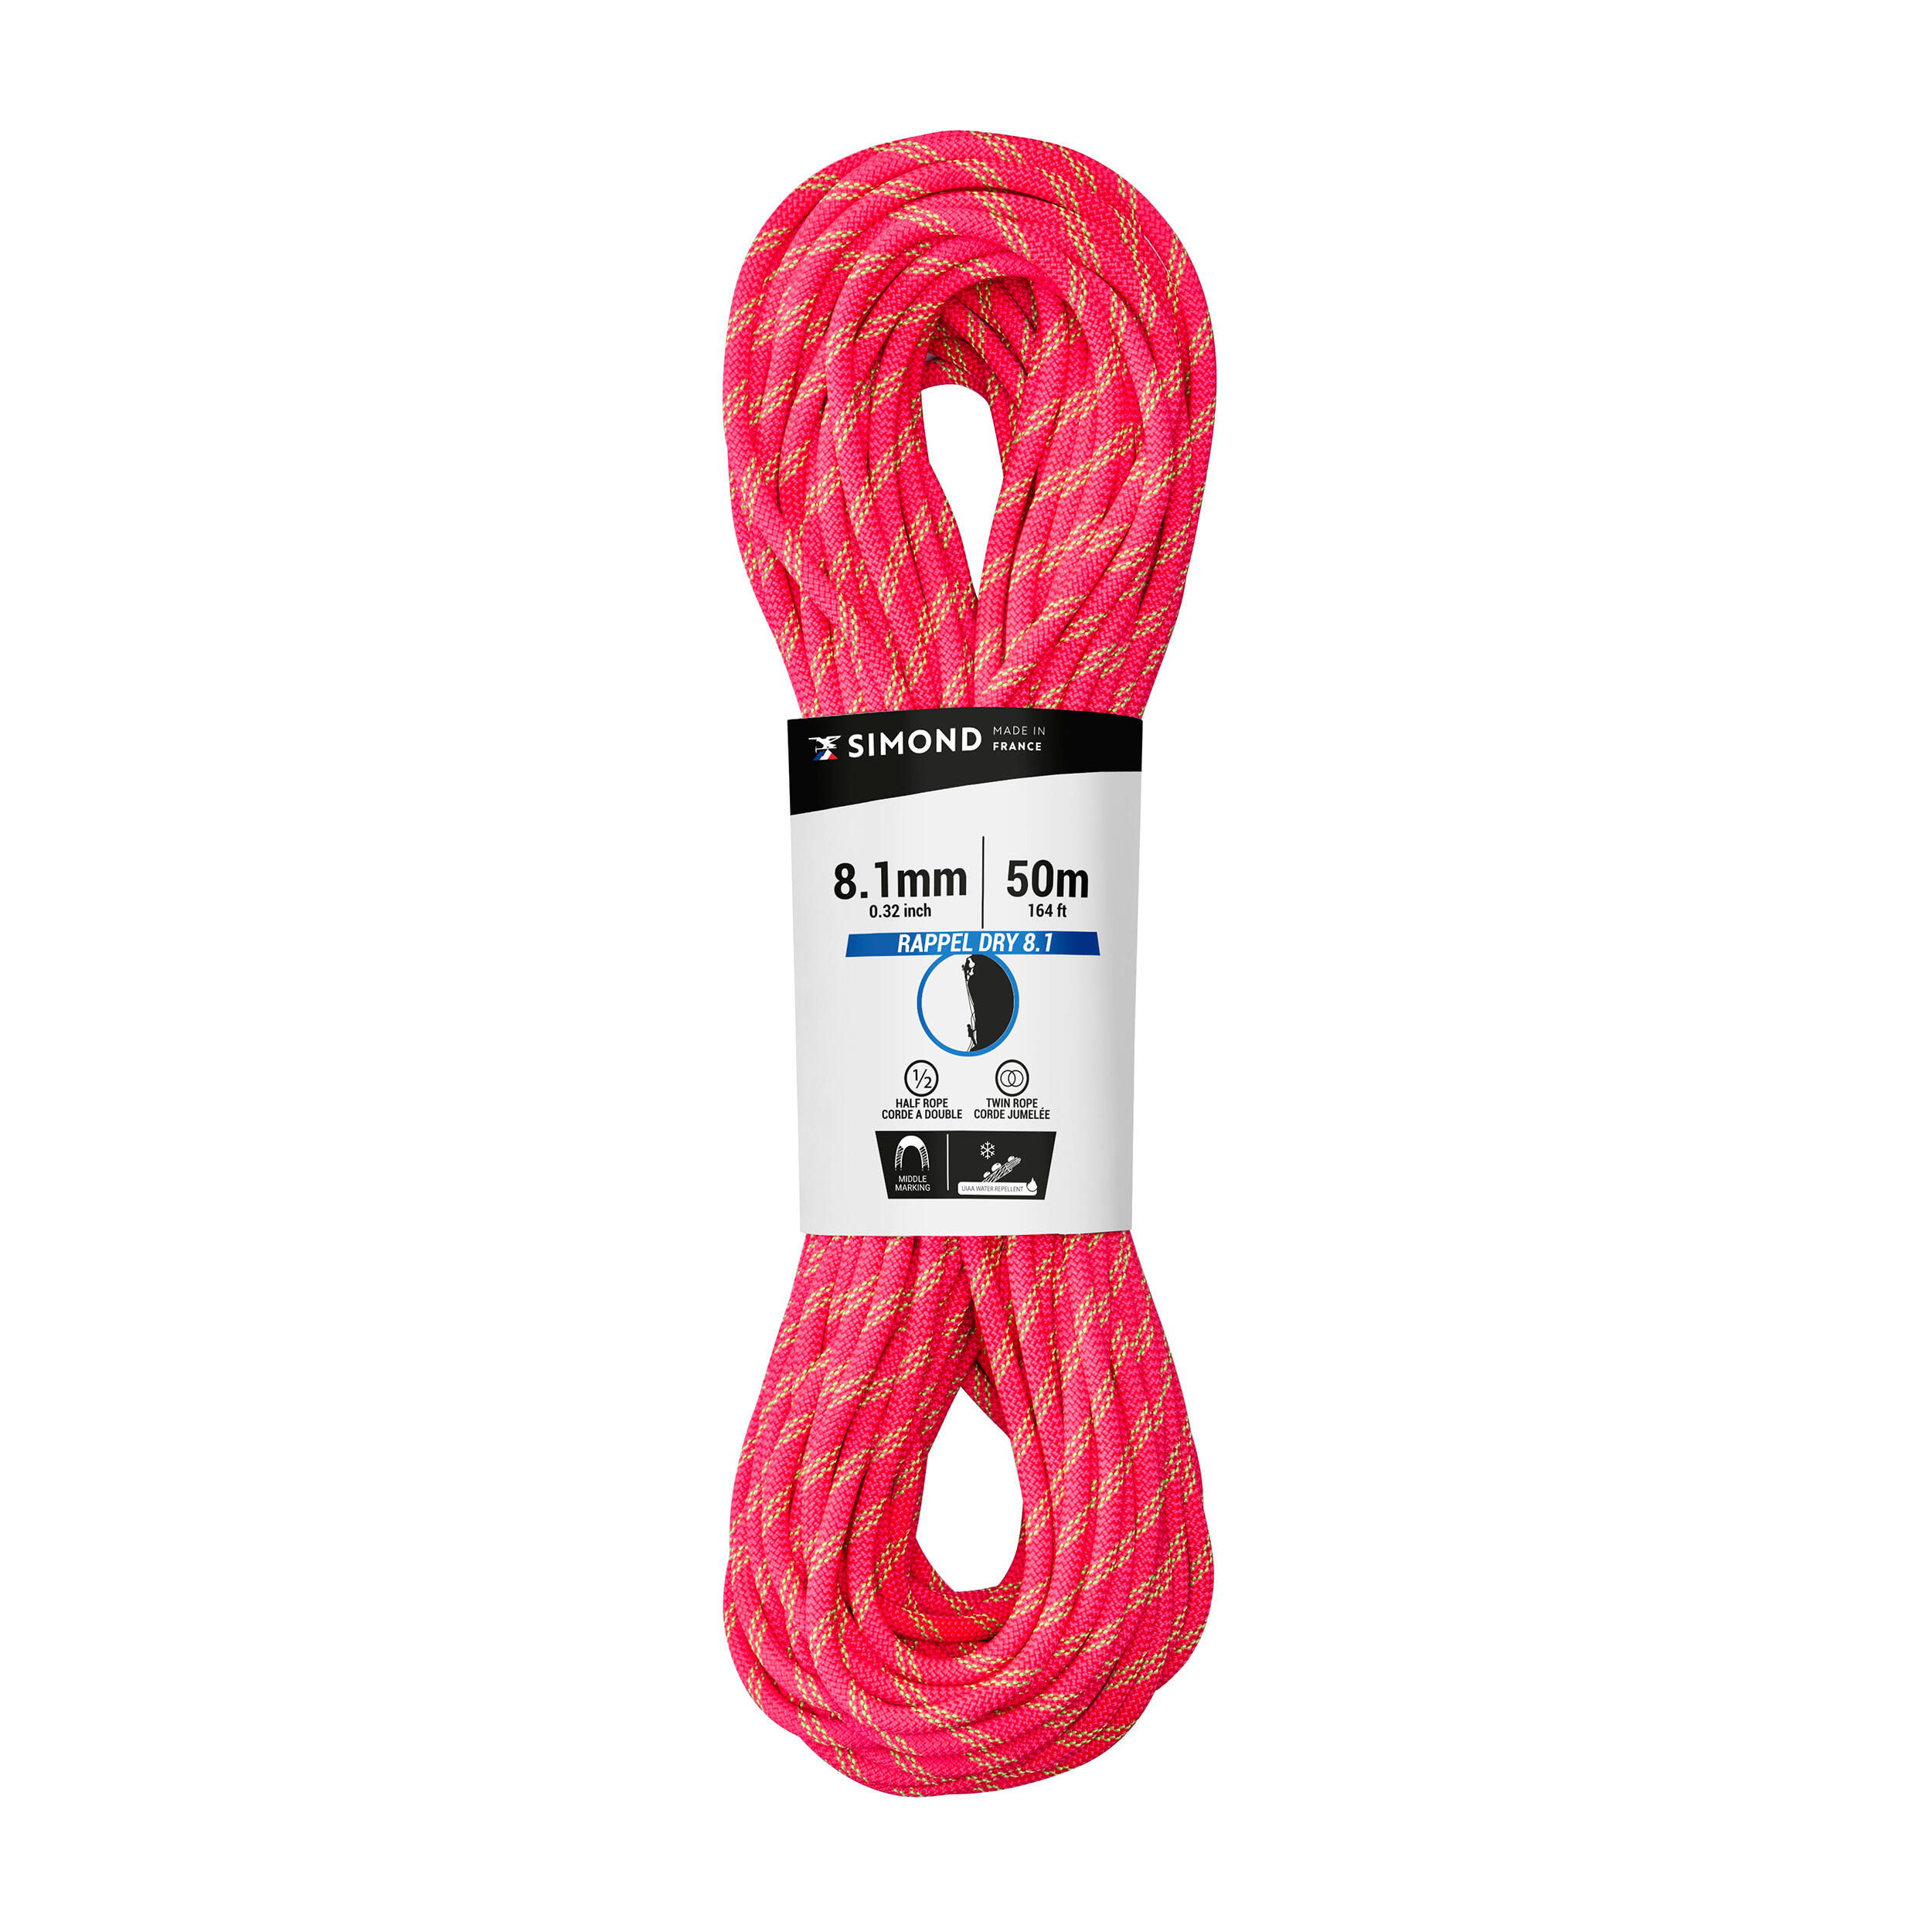 Double dry climbing and mountaineering rope 8.1 mm x 50 m - Rappel 8.1 Pink 1/6